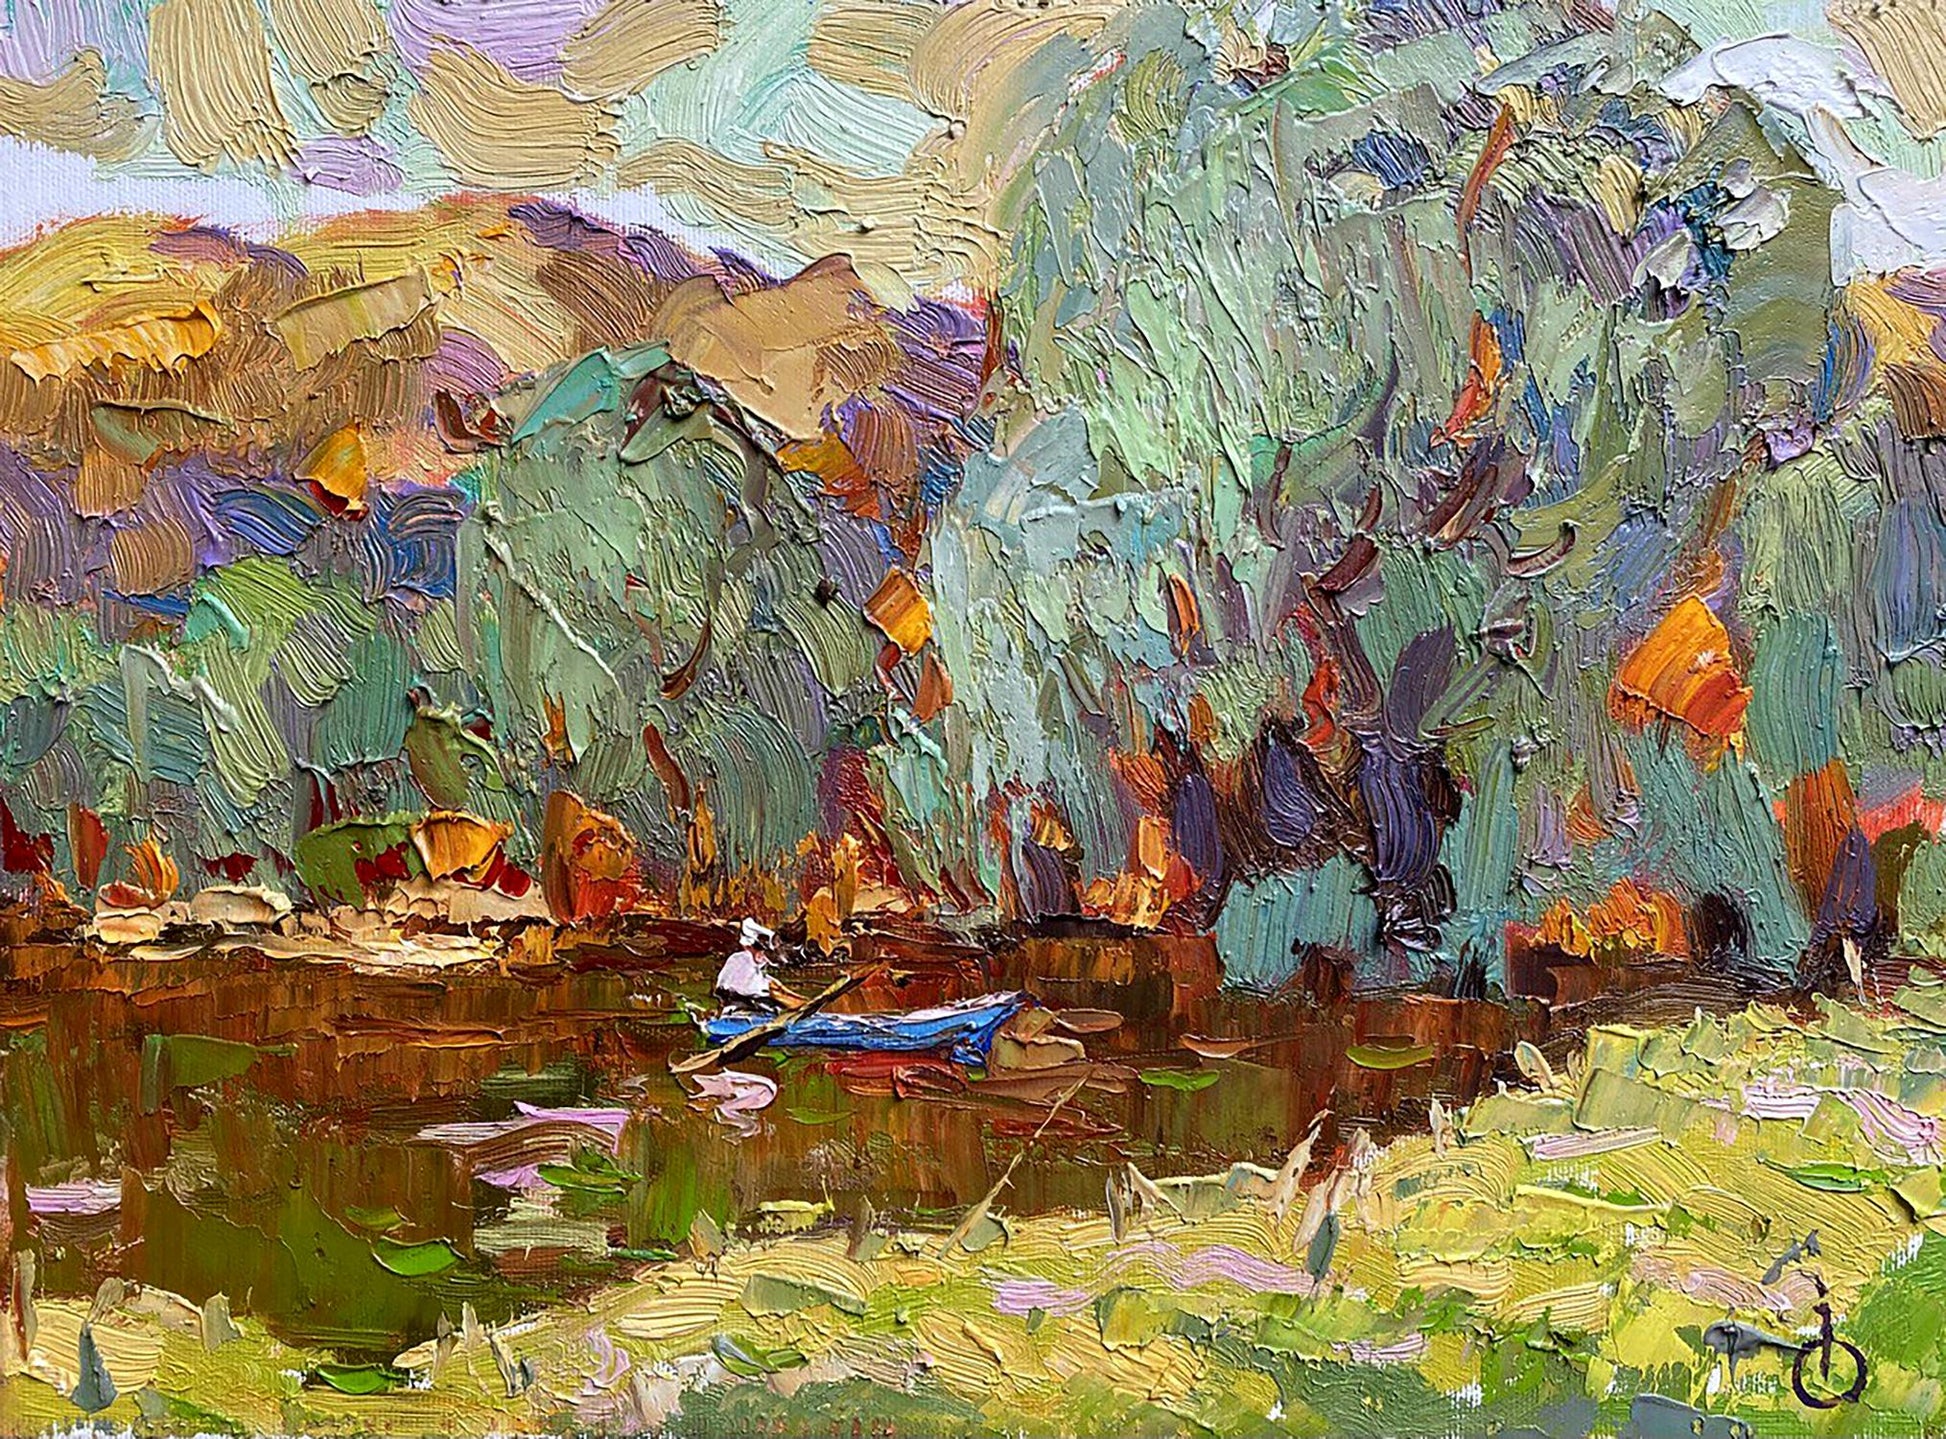 Oil painting pond